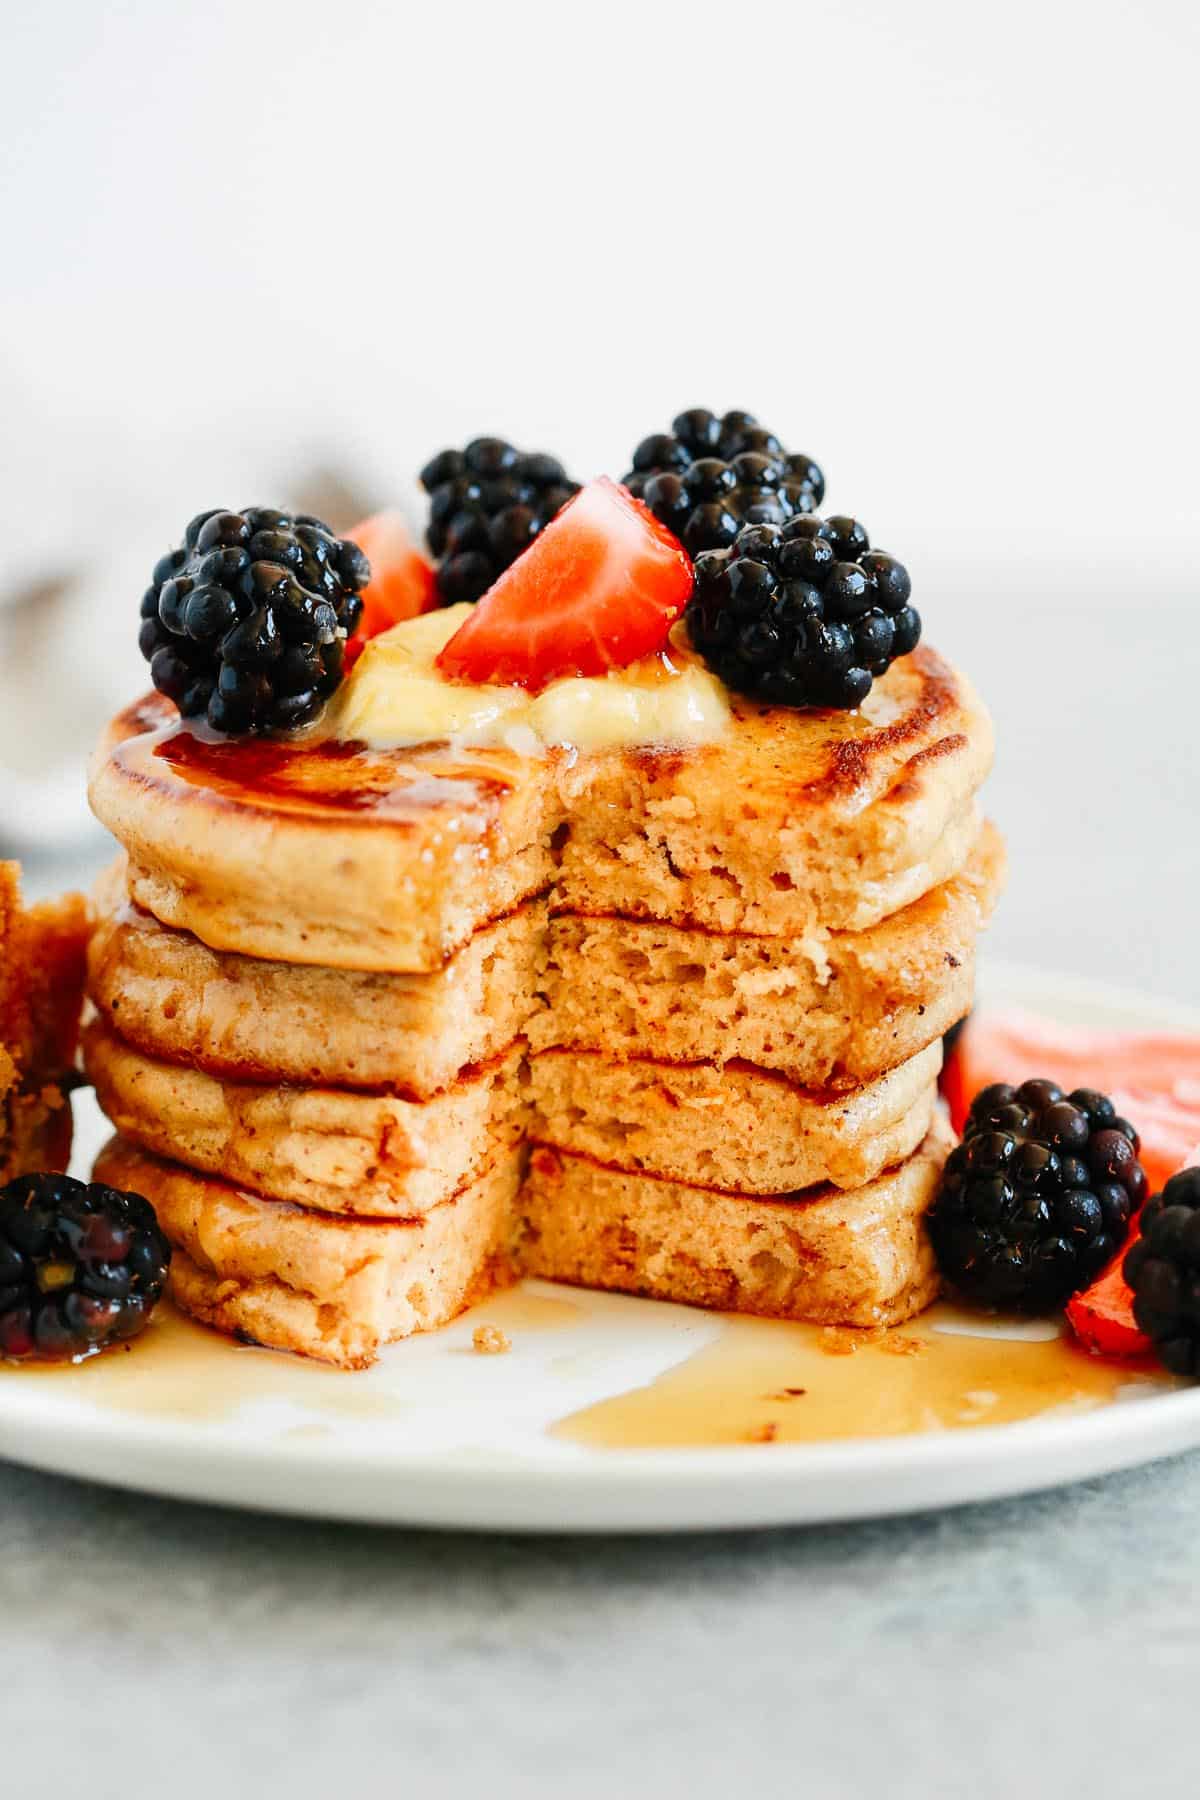 gluten free pancakes recipes round up by eatingworks.